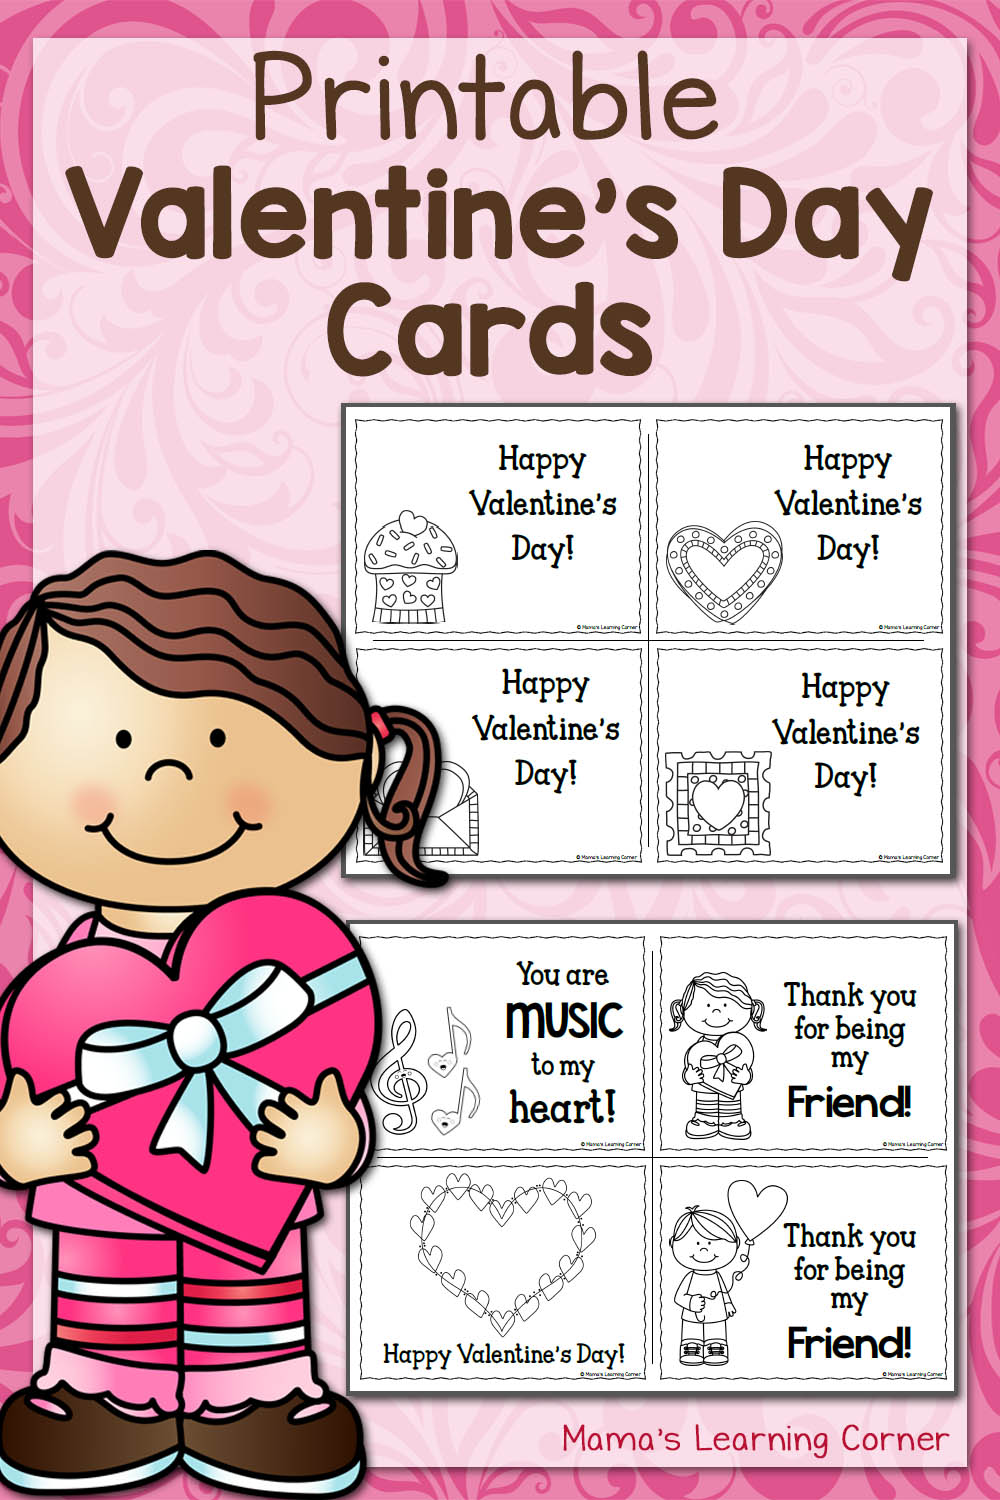 Printable Valentine's Day Cards Mamas Learning Corner